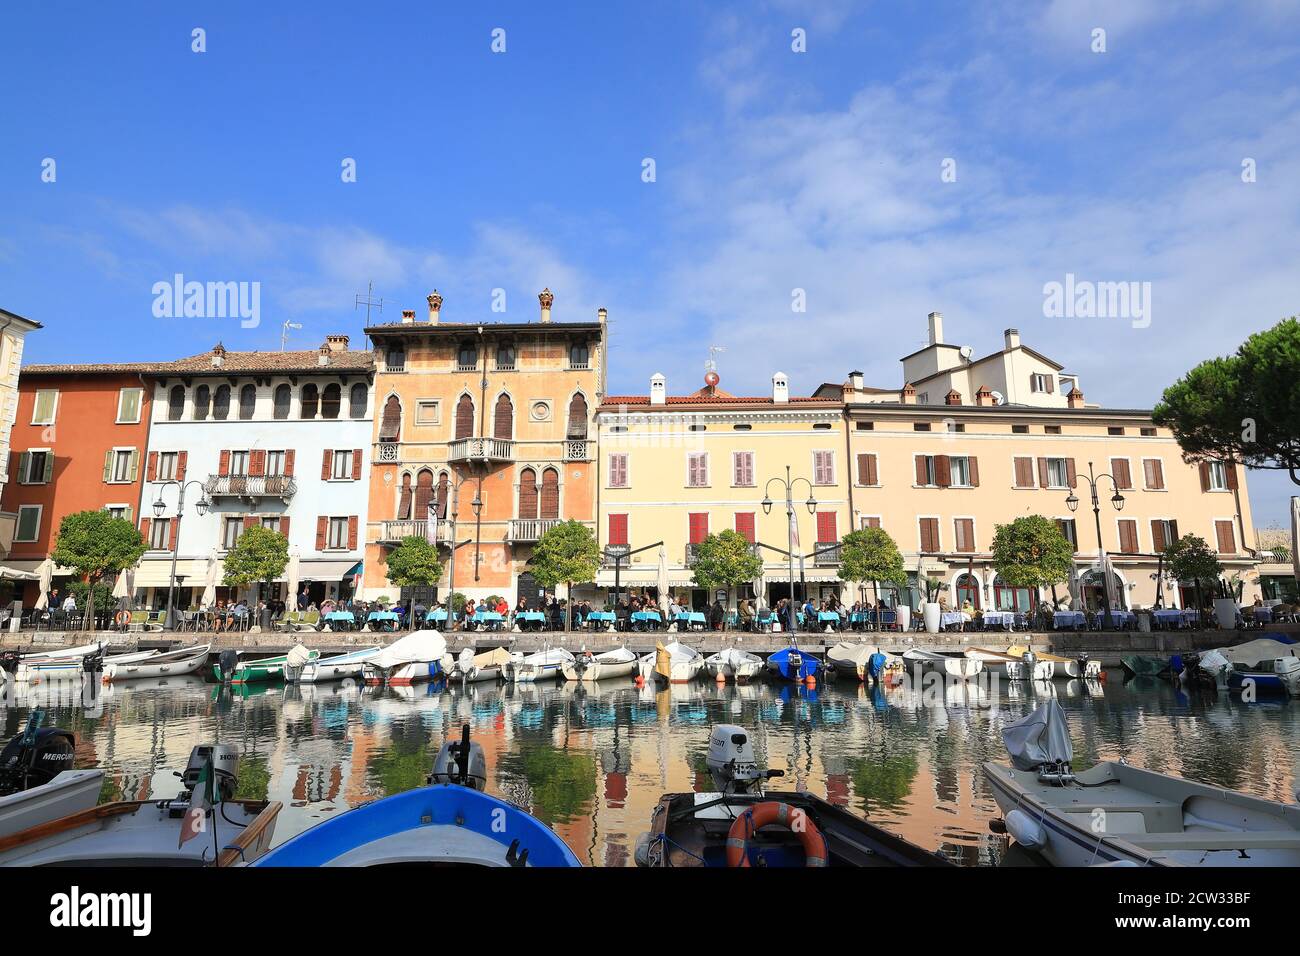 The view across boats moored in the resort town of Desenzano to cafes and restaurants.  Desenzano is on the edge of Lake Garda in North East Italy. Stock Photo